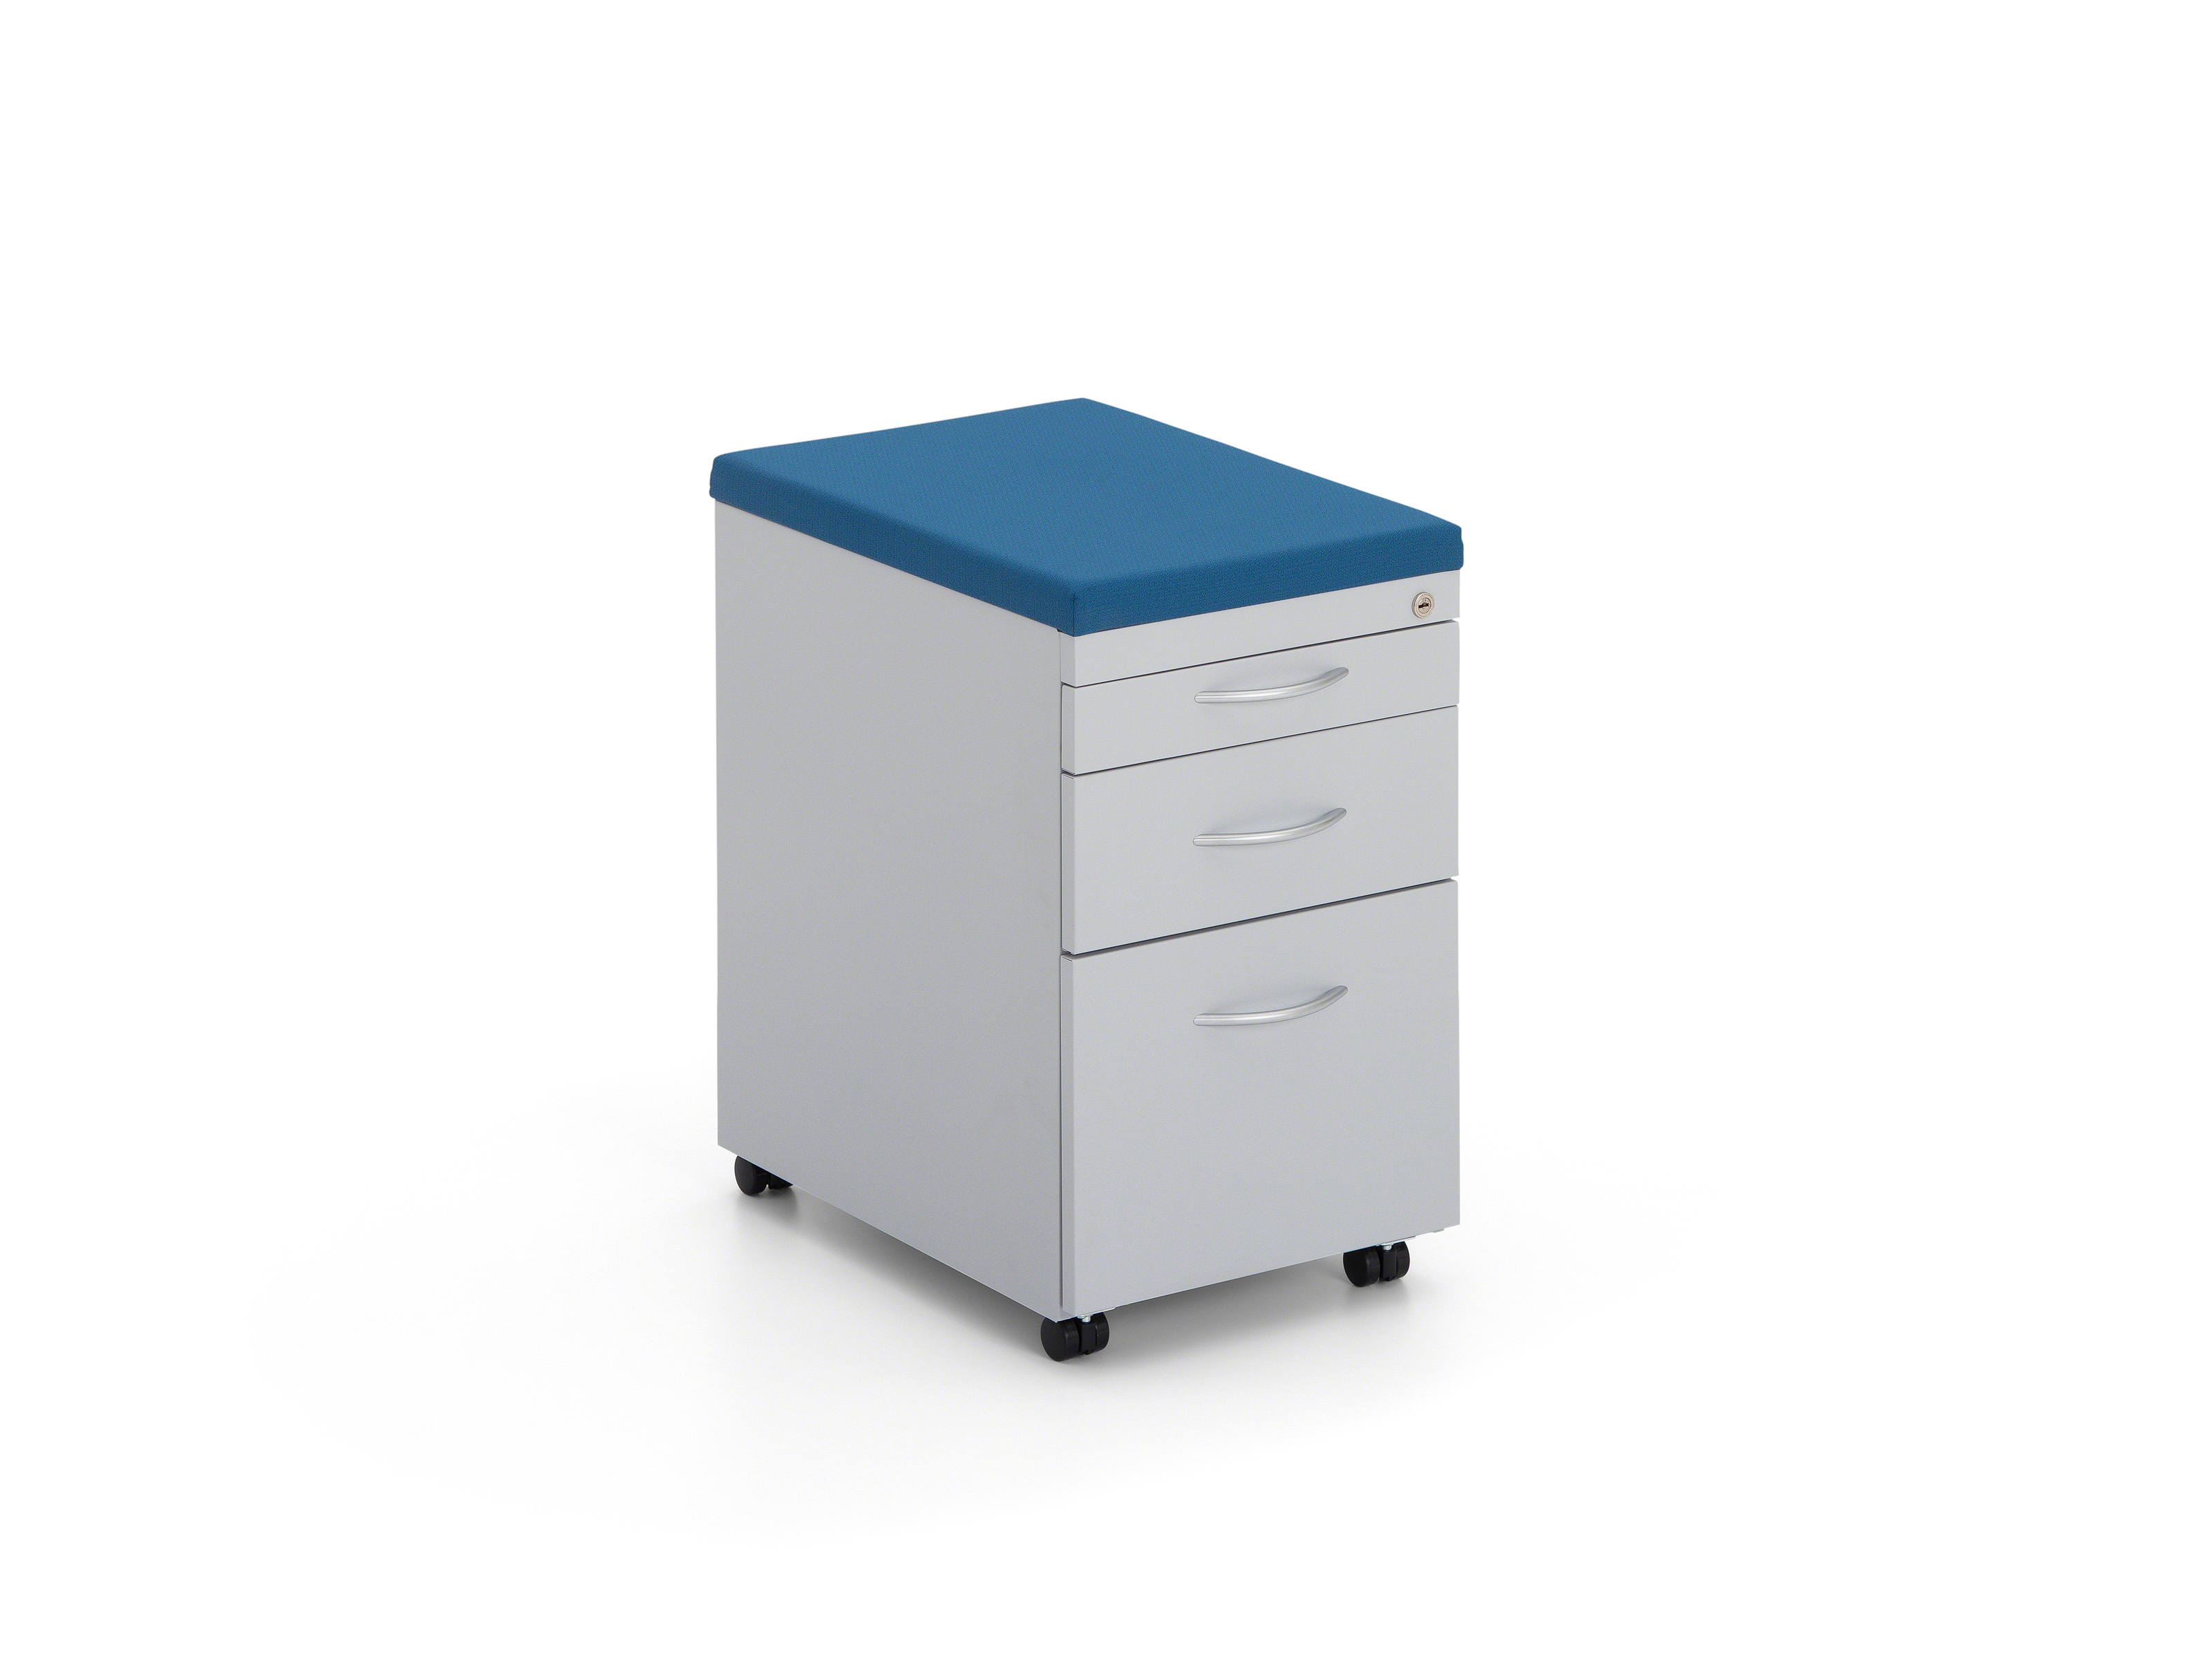 Ts Series Lateral File Cabinets Storage Steelcase with dimensions 3200 X 2400